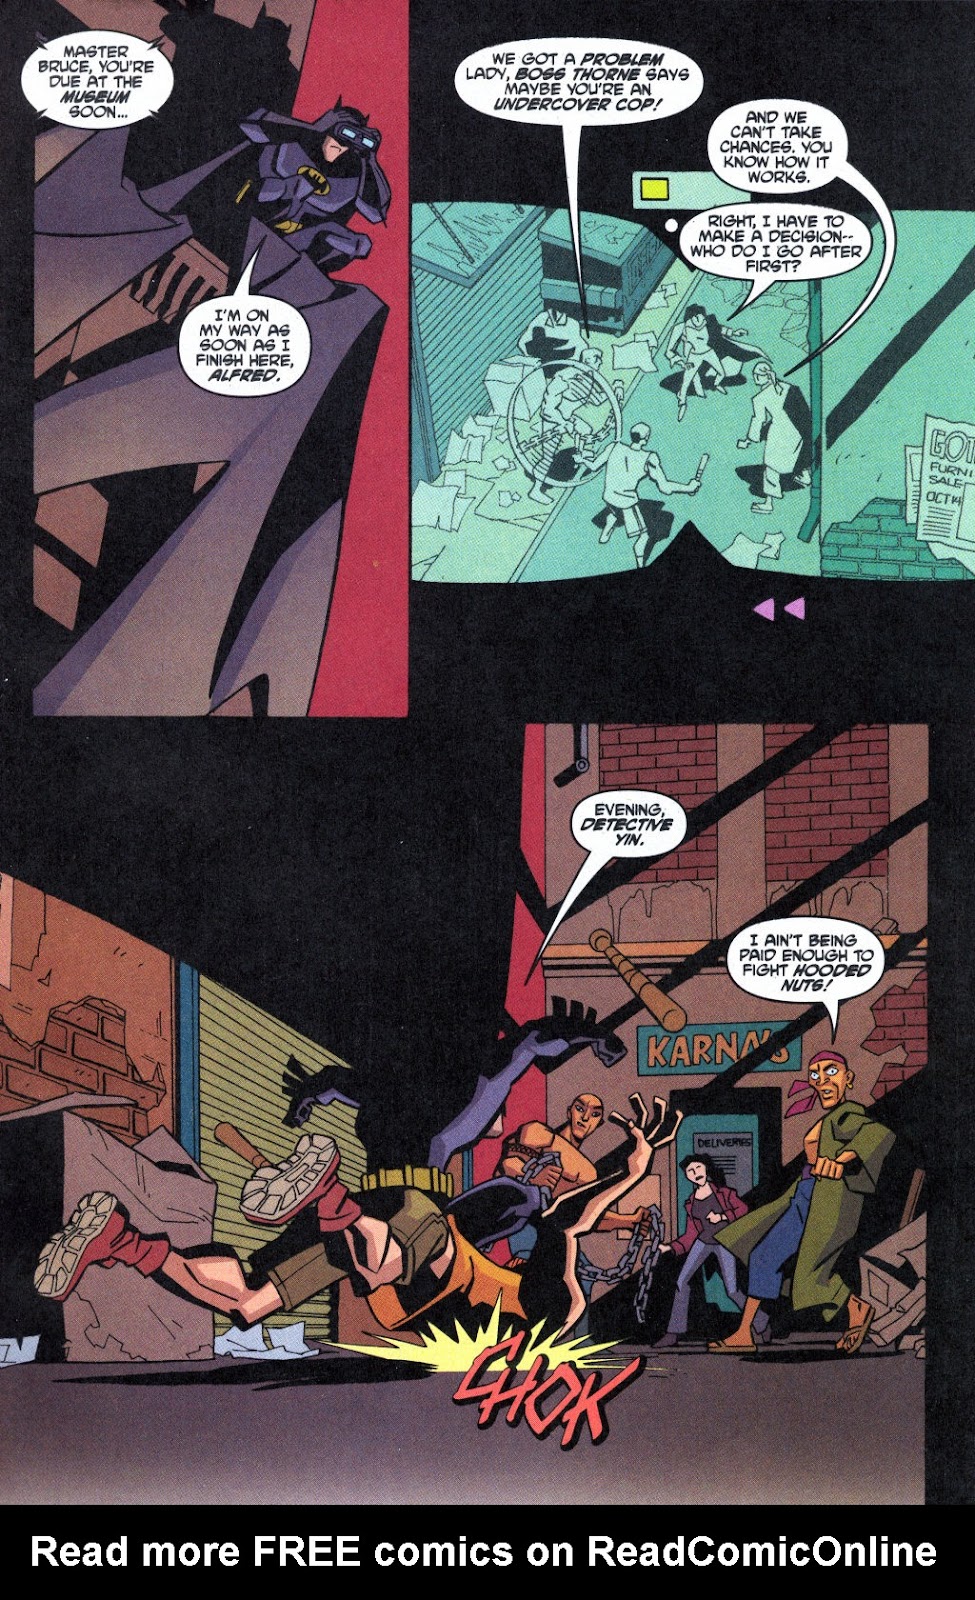 The Batman Strikes! issue 1 (Burger King Giveaway Edition) - Page 3